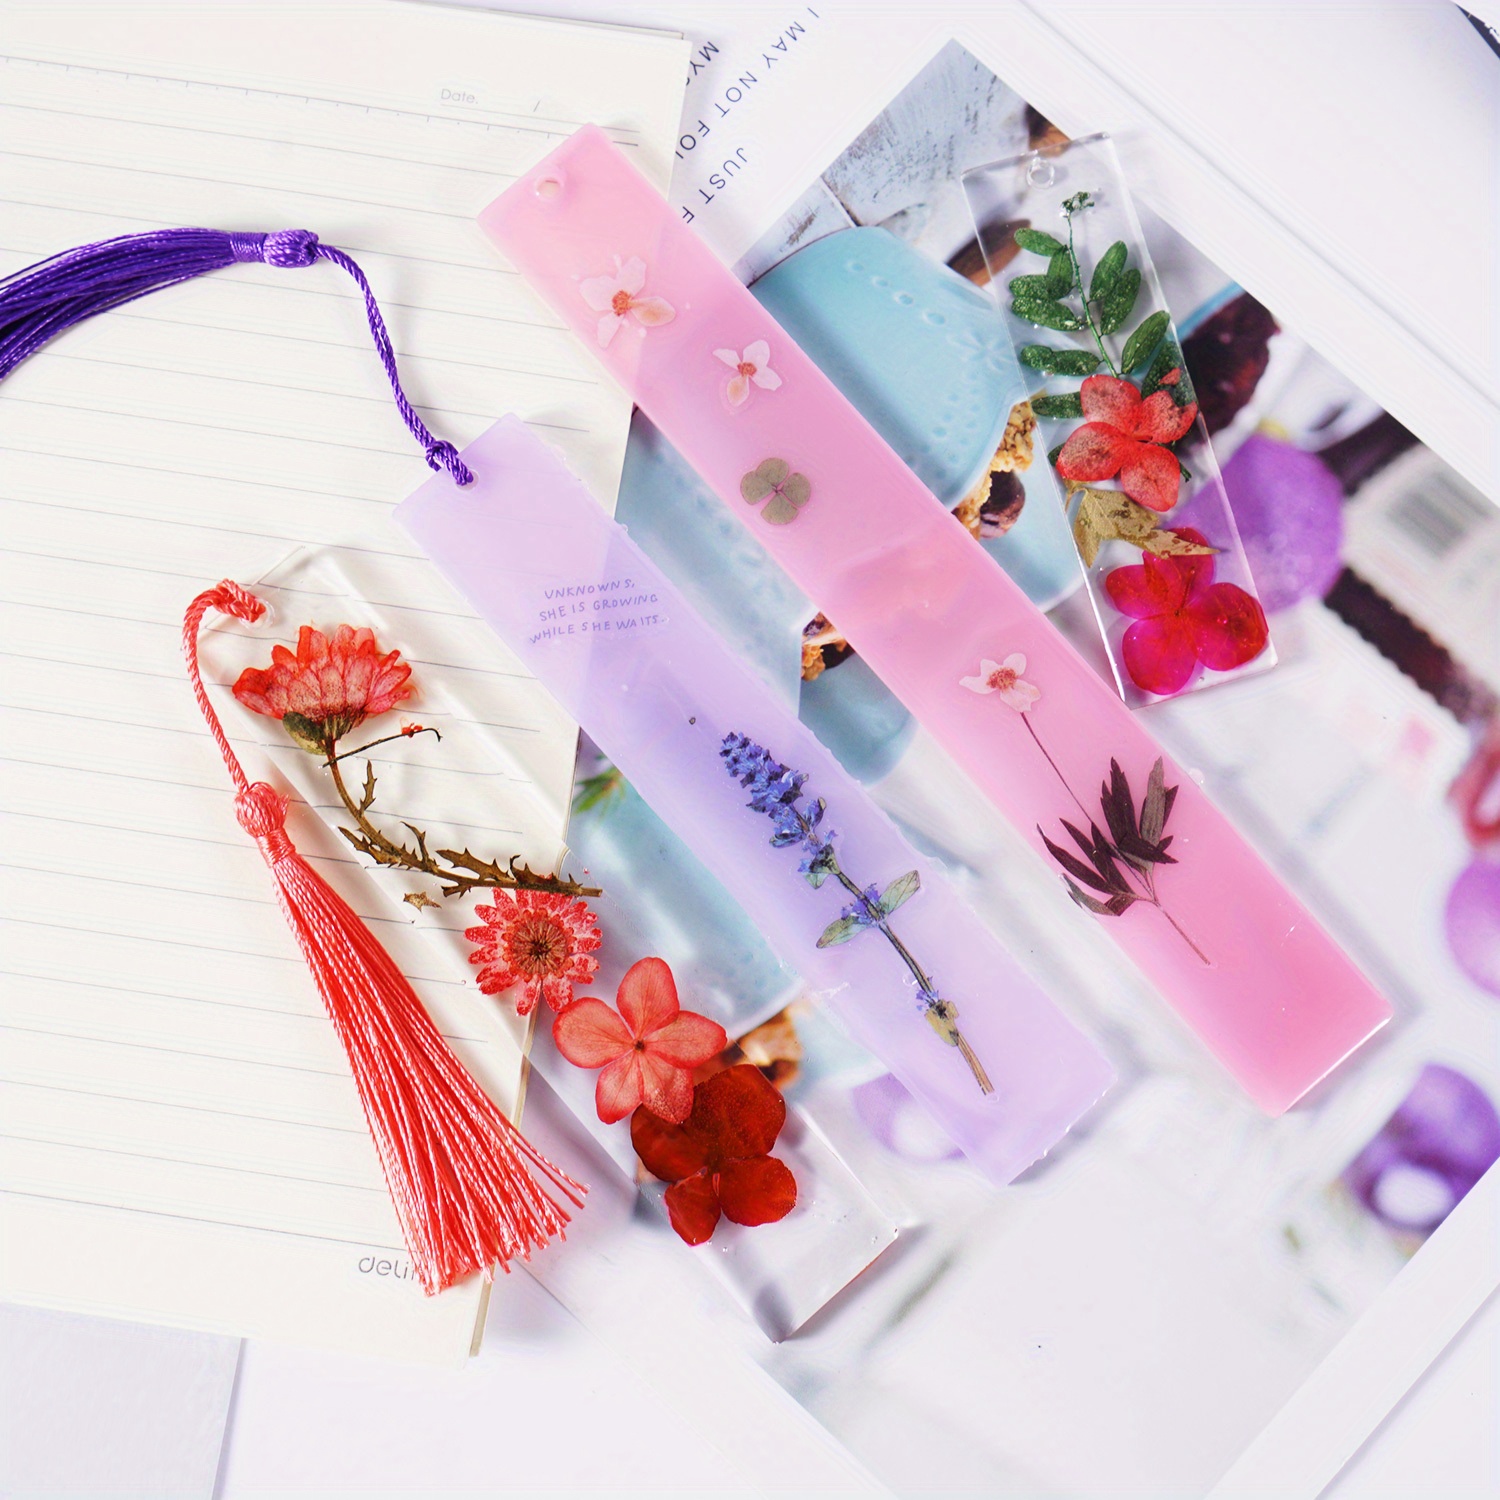 33Pcs Bookmark Resin Mold Kit with Colorful Tassels,Epoxy Resin